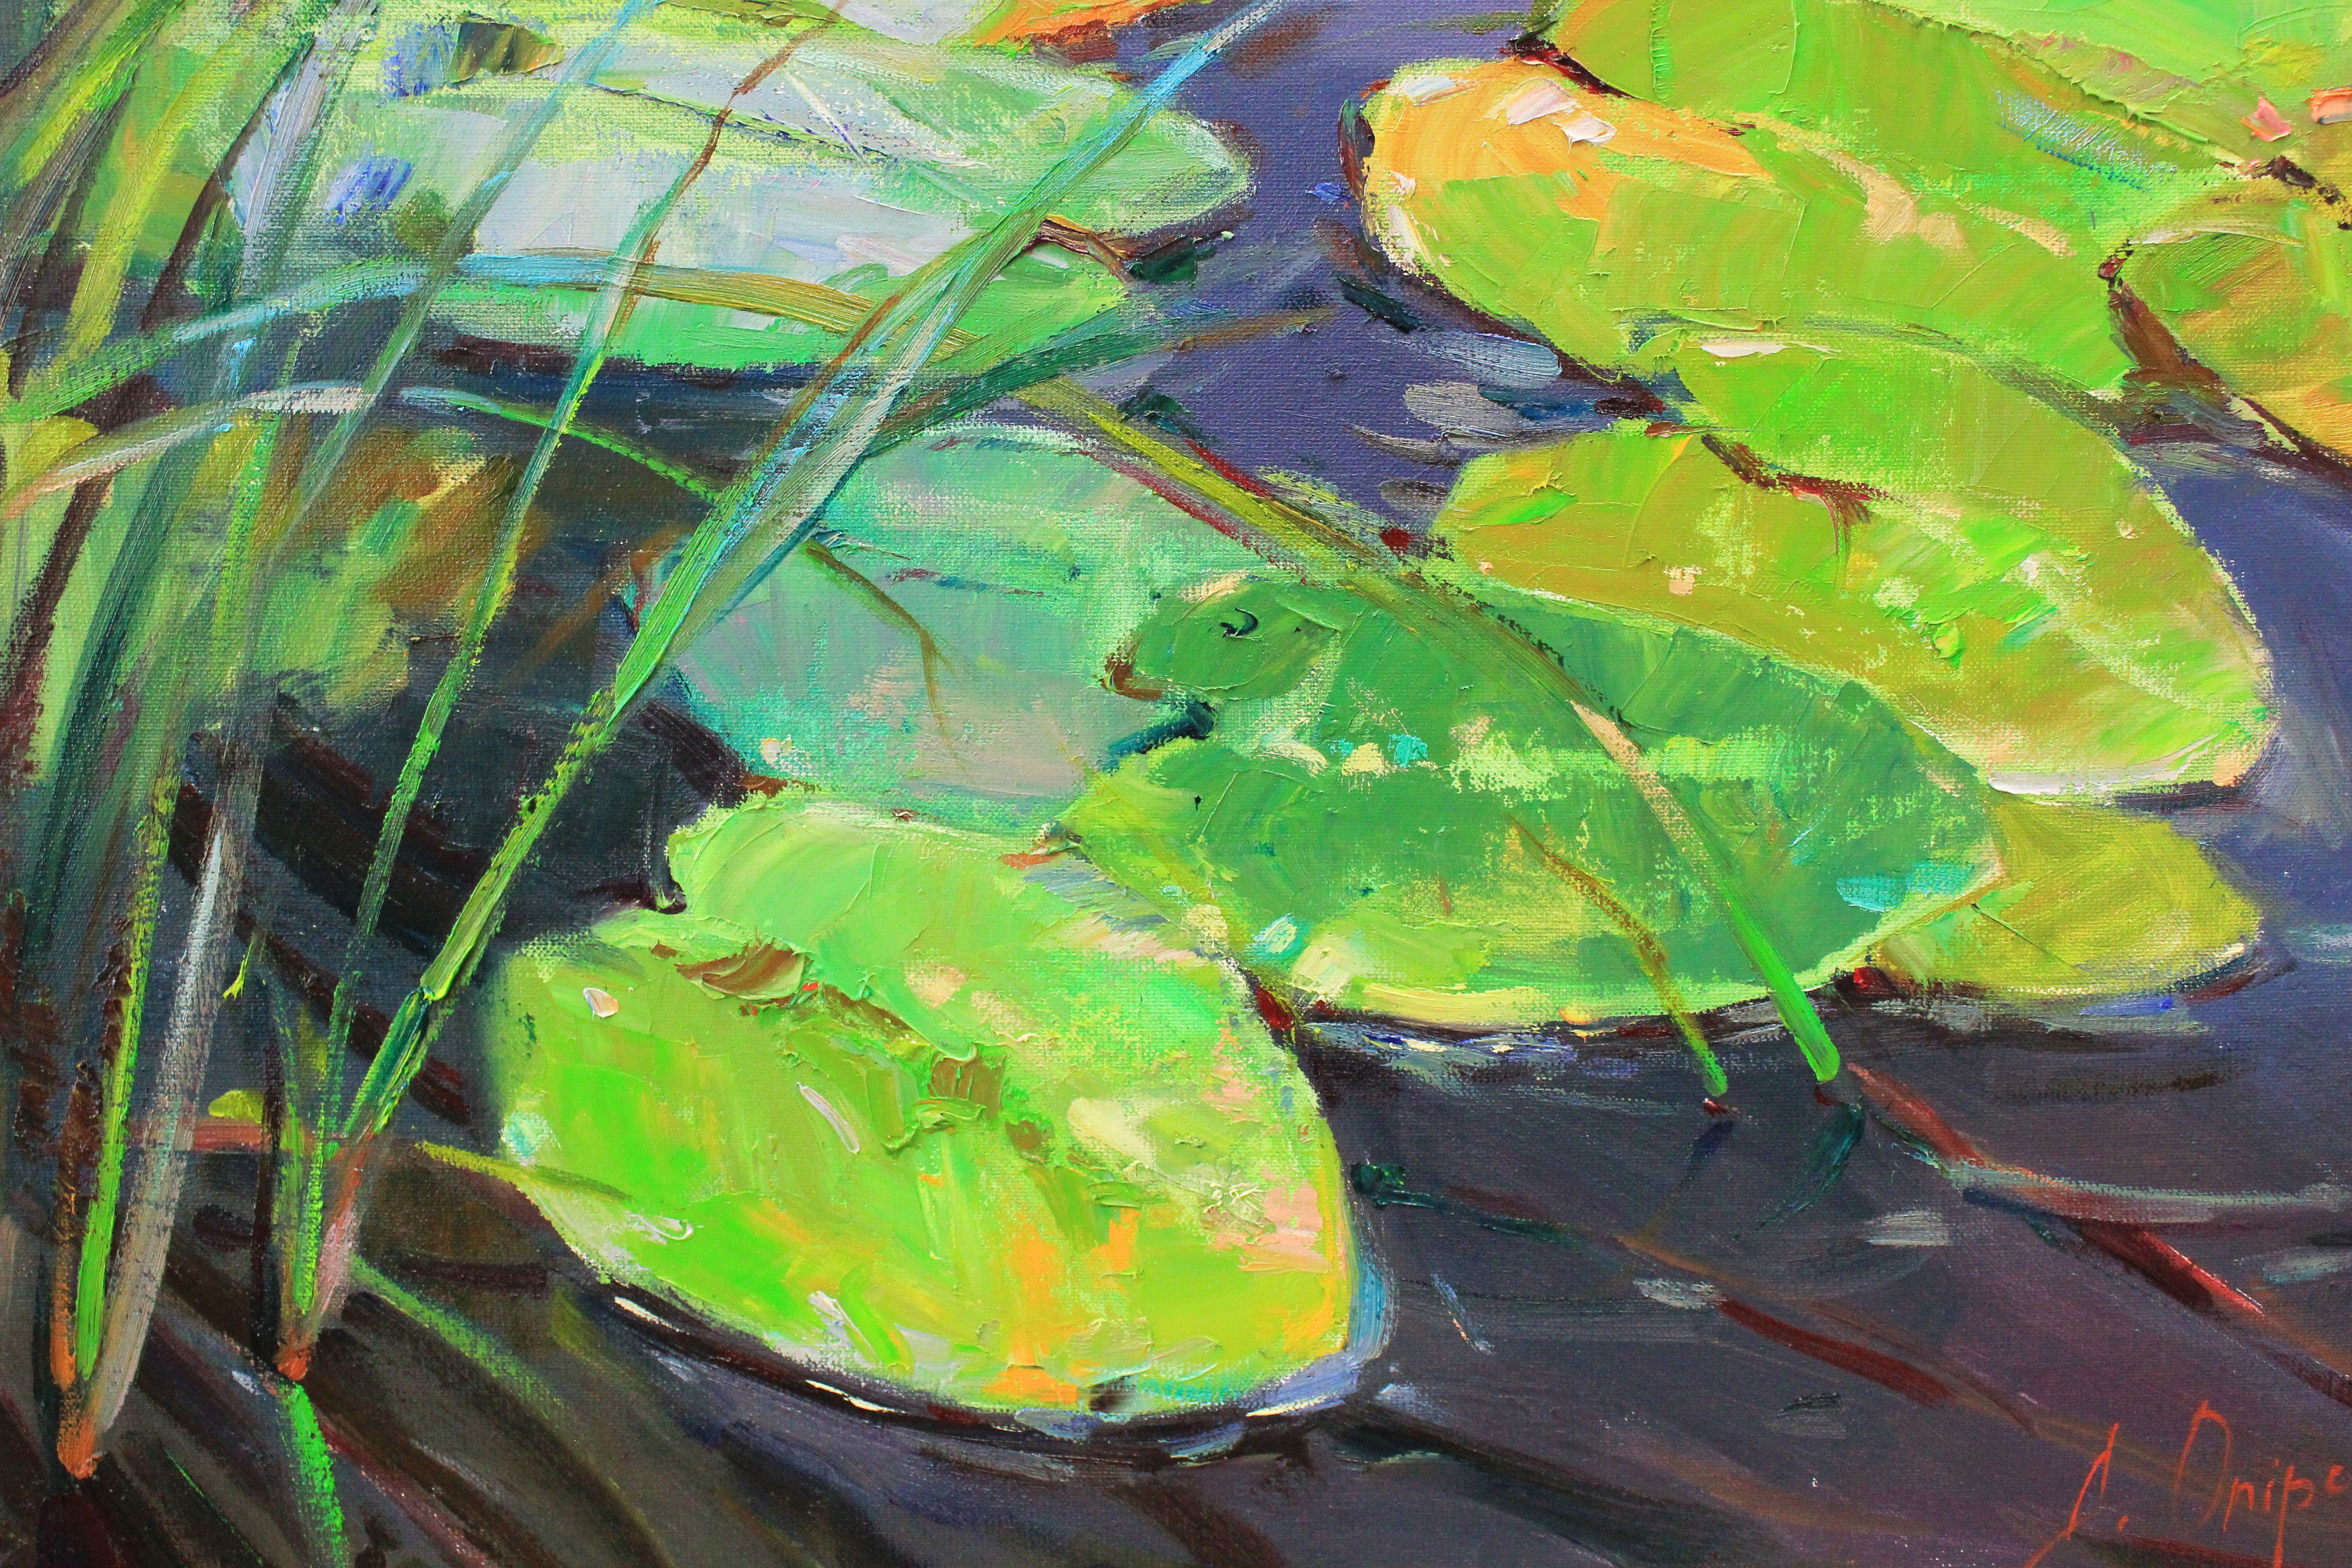 Original Oil painting by Ukrainian artist Alisa Onipchenko  Summer landscape with a river and water lilies with bright contrasting lighting. Artwork in the style of Impressionism, Expressionism conveys the warmth of a summer day. Plein air painting